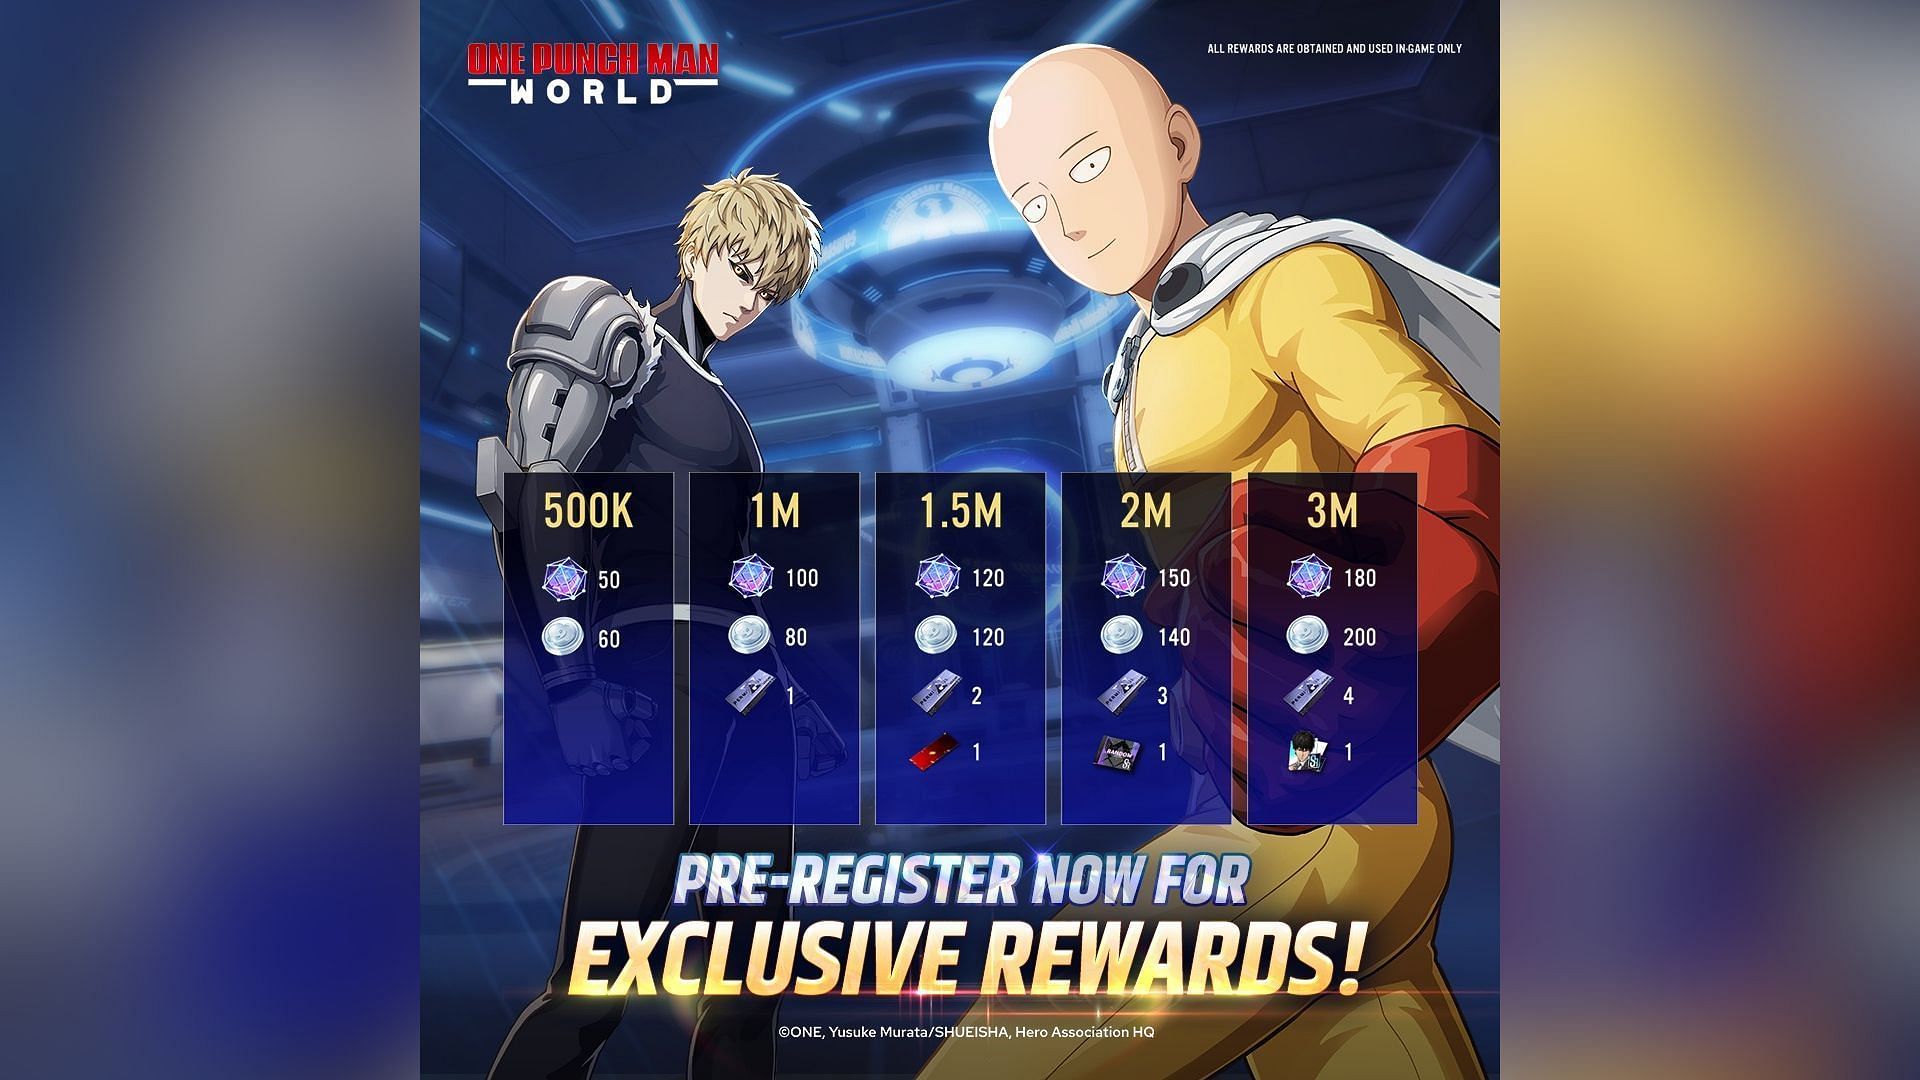 Pre-registration rewards for One Punch Man (Image via Perfect World)